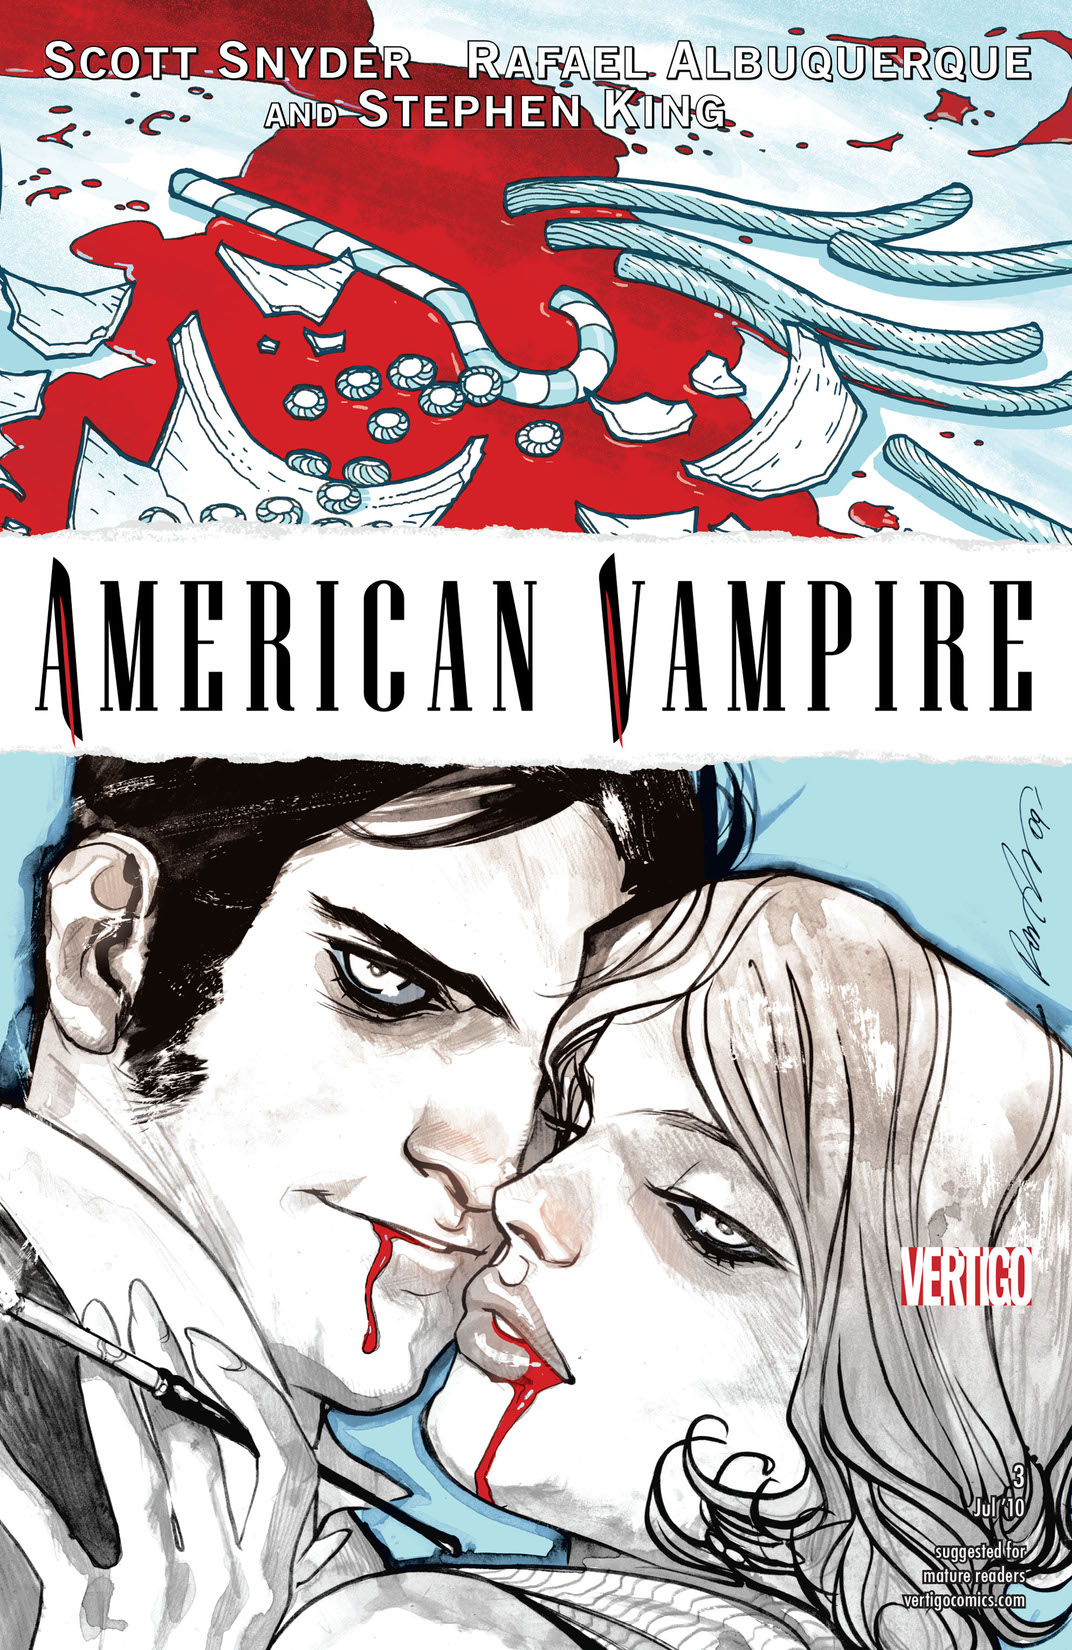 American Vampire #3 preview images